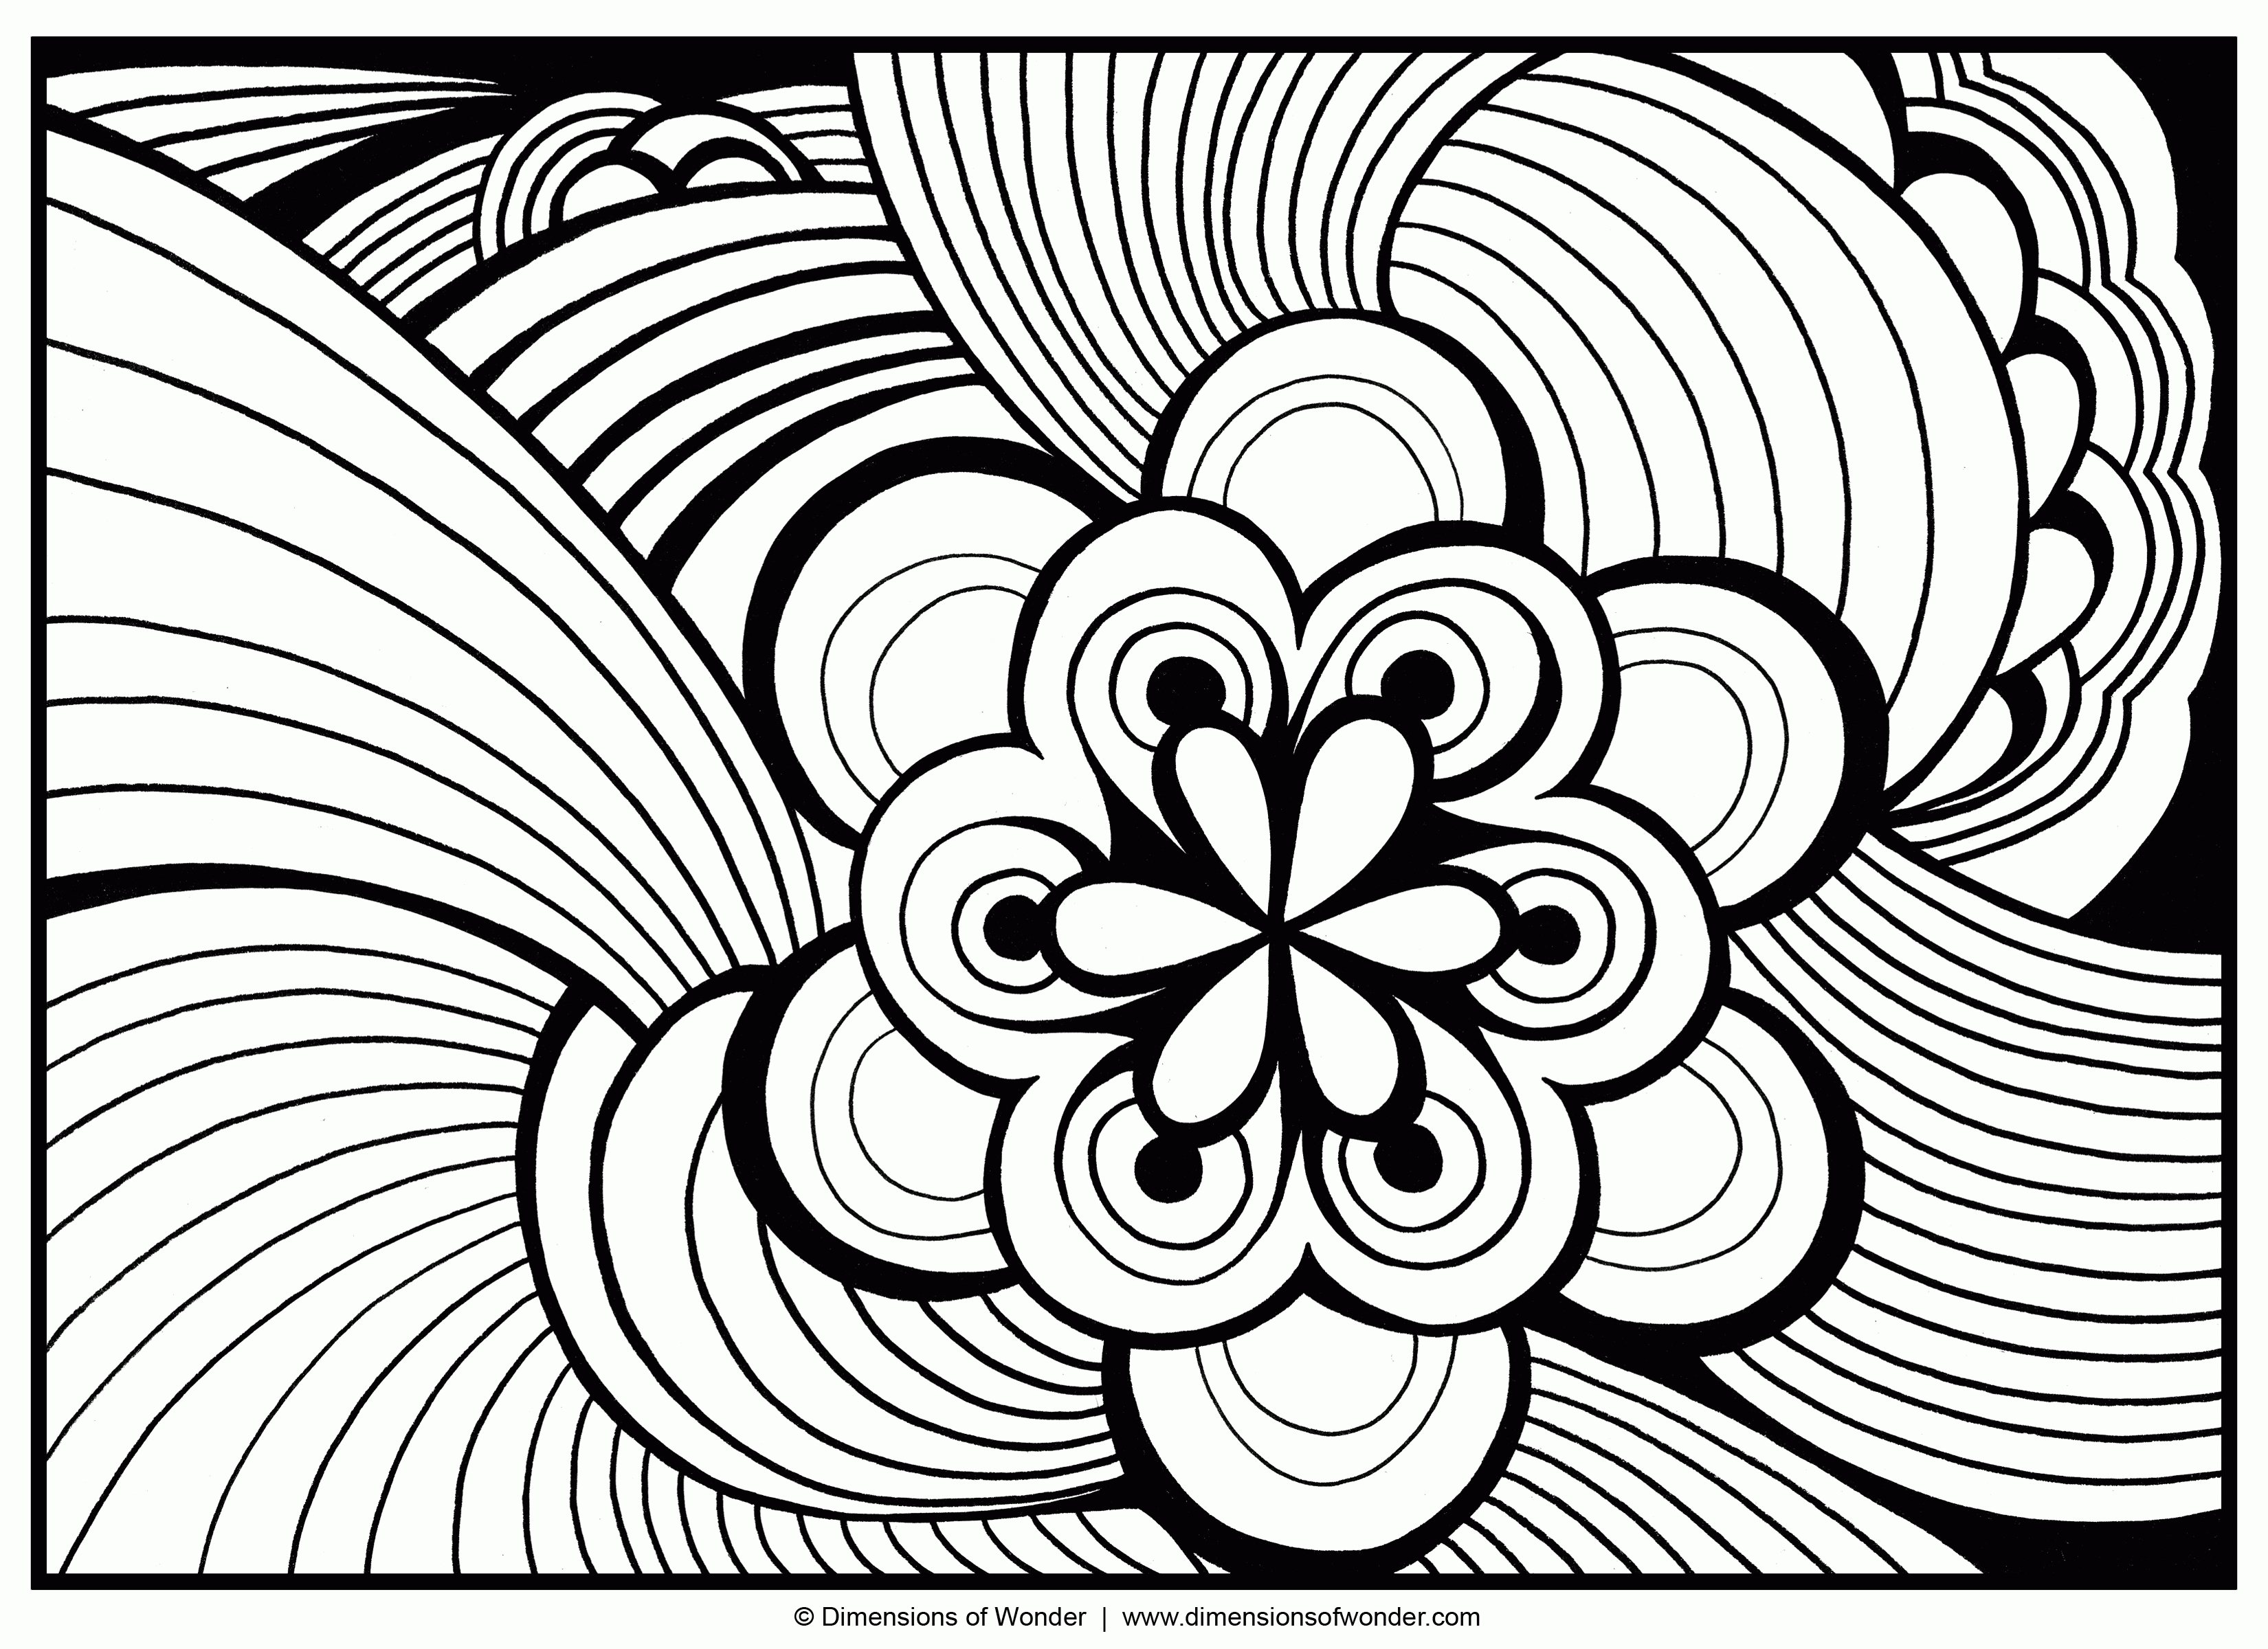 Coloring Ideas : Coloring Ideas Cool Pages Adults For Mandala - Free Printable Coloring Designs For Adults